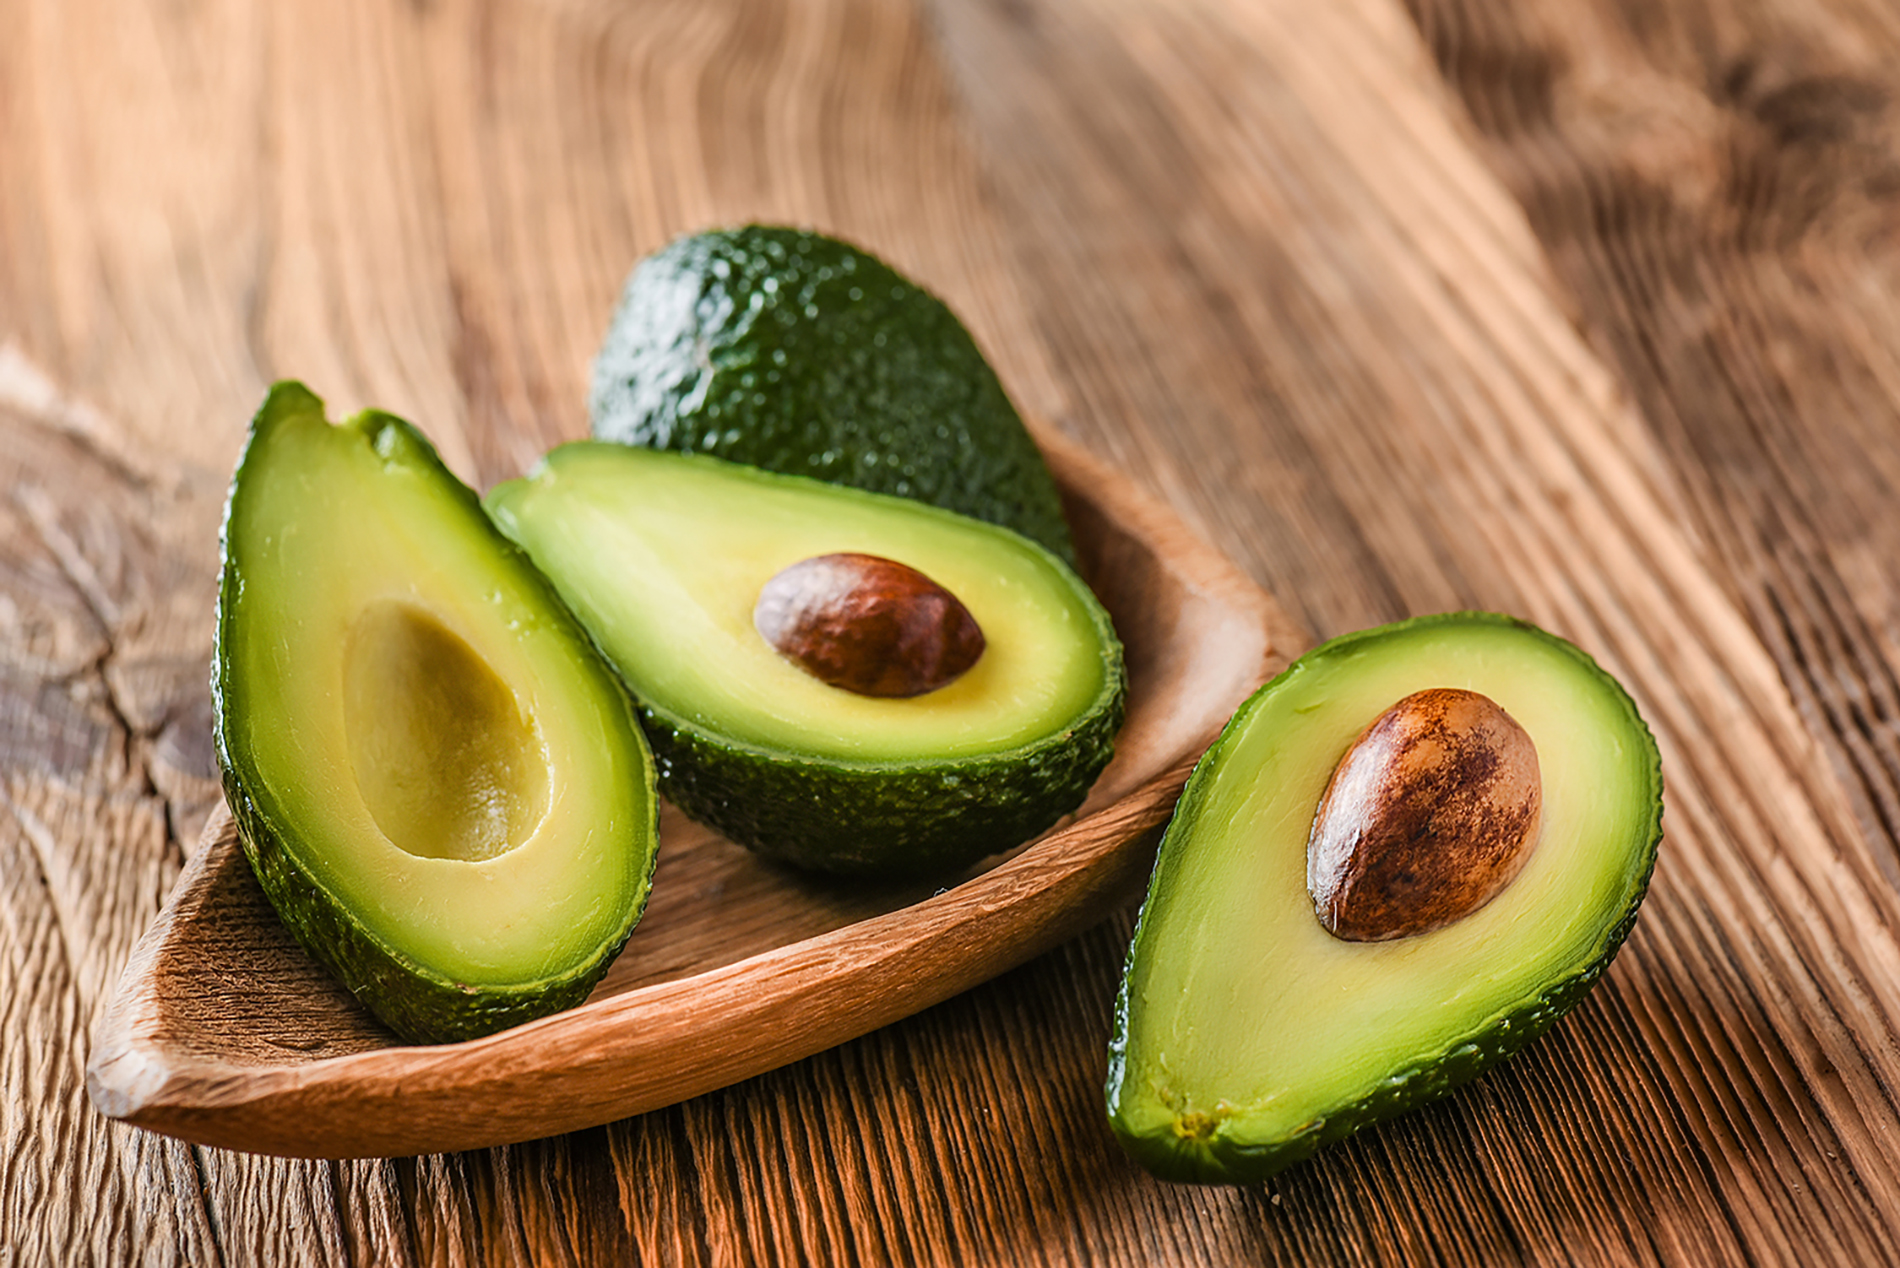 Benefits of Avocado for Keeping Your Life Healthy